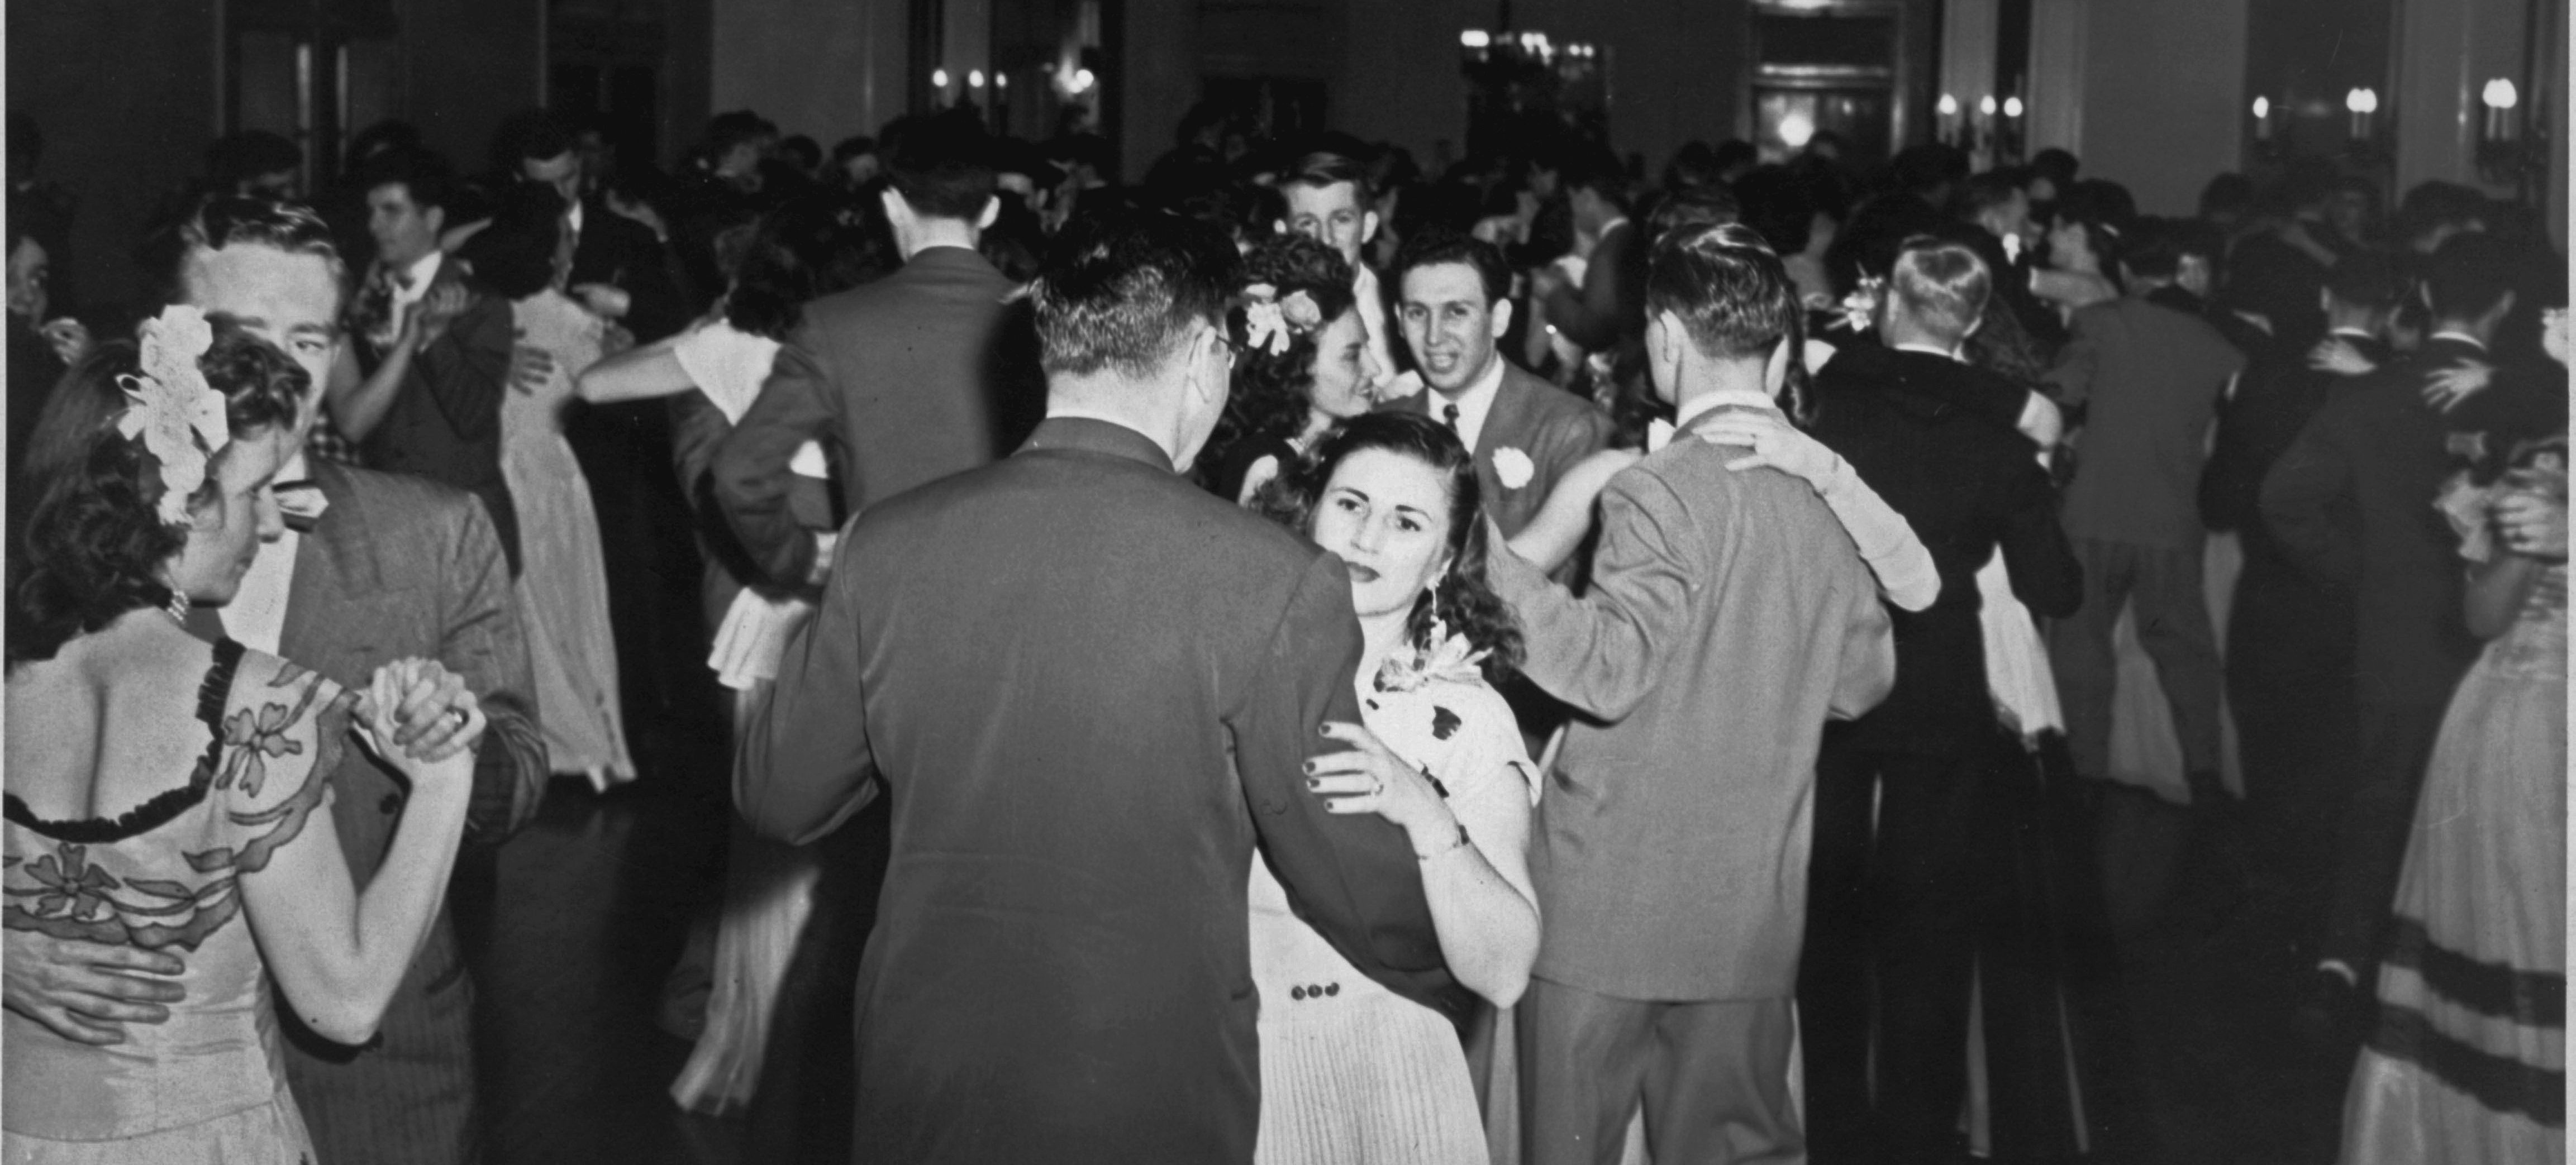 Dancing the night away in the ’50s.